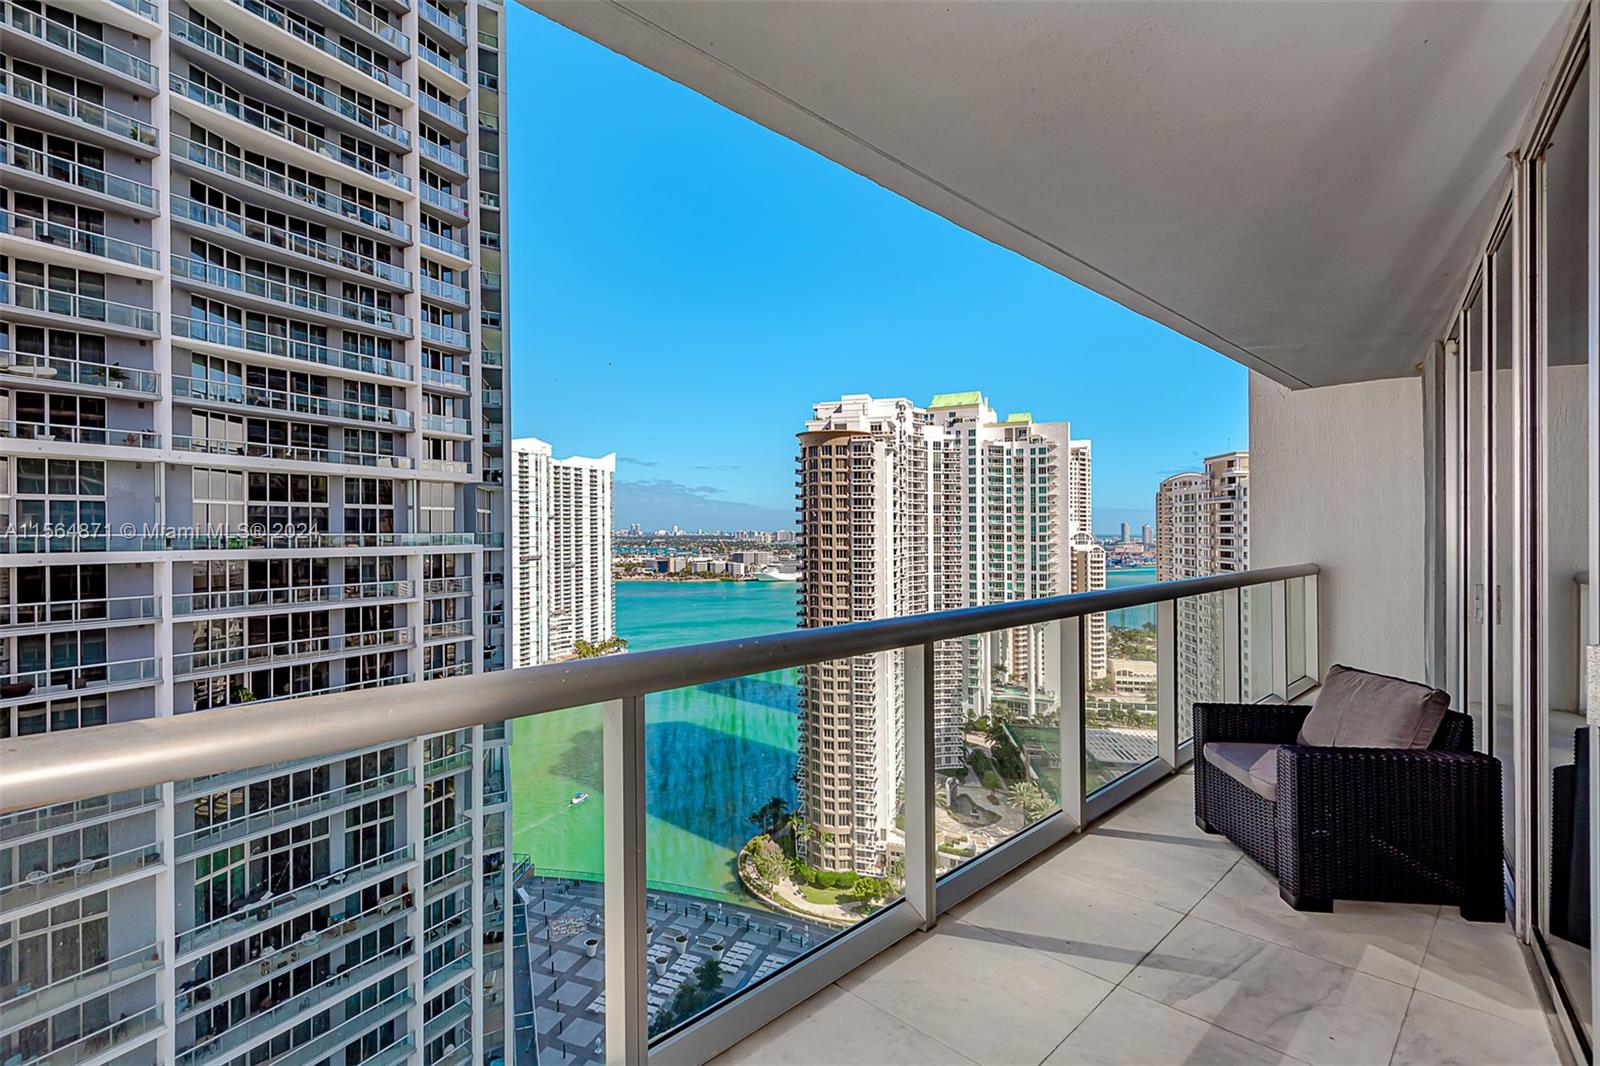 Beautiful corner unit with spectacular Bay and City views at the most desirable building in Brickell. Large 2bed/2baths, porcelain floors, walk-in closets. The unit is impeccable. Fully equipped kitchen, Italian designer furniture throughout. Great amenities including gym, pools, sauna and club house. Walking distance to restaurants, banking districts and fantastic shopping. Unit comes with 1 parking space, 1 valet. Basic cable and internet included.